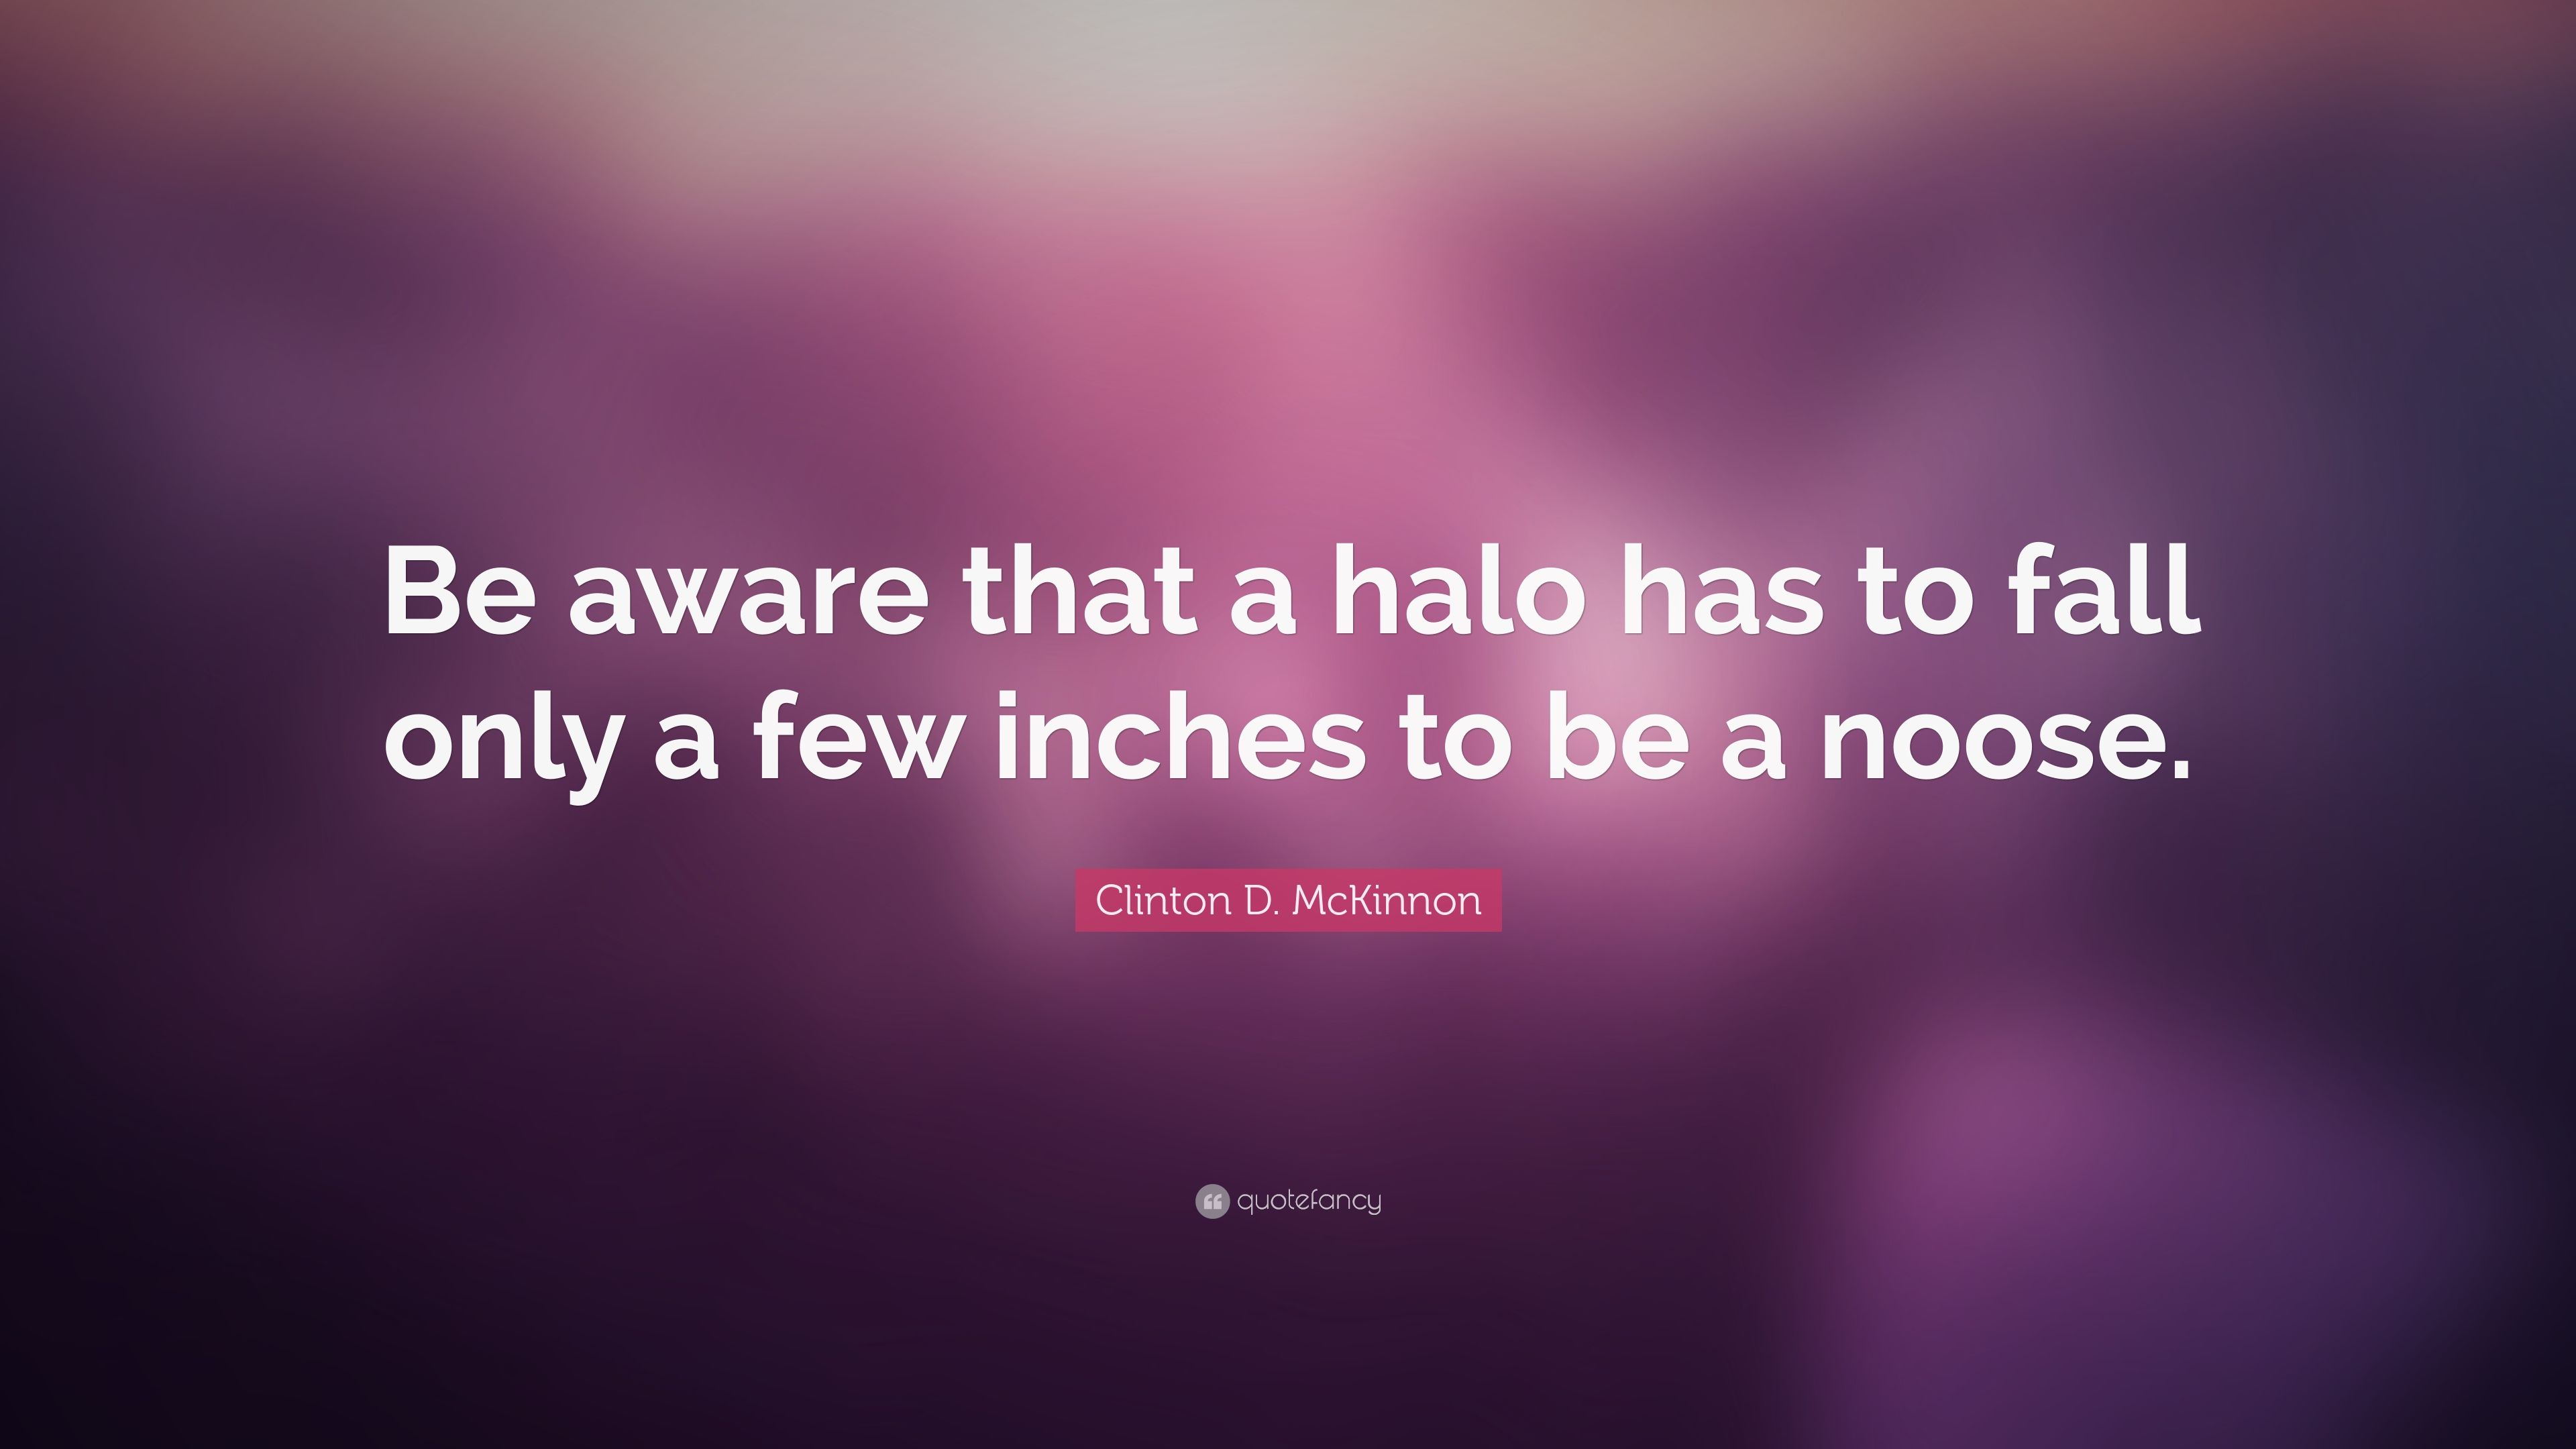 Clinton D. McKinnon Quote: “Be aware that a halo has to fall only